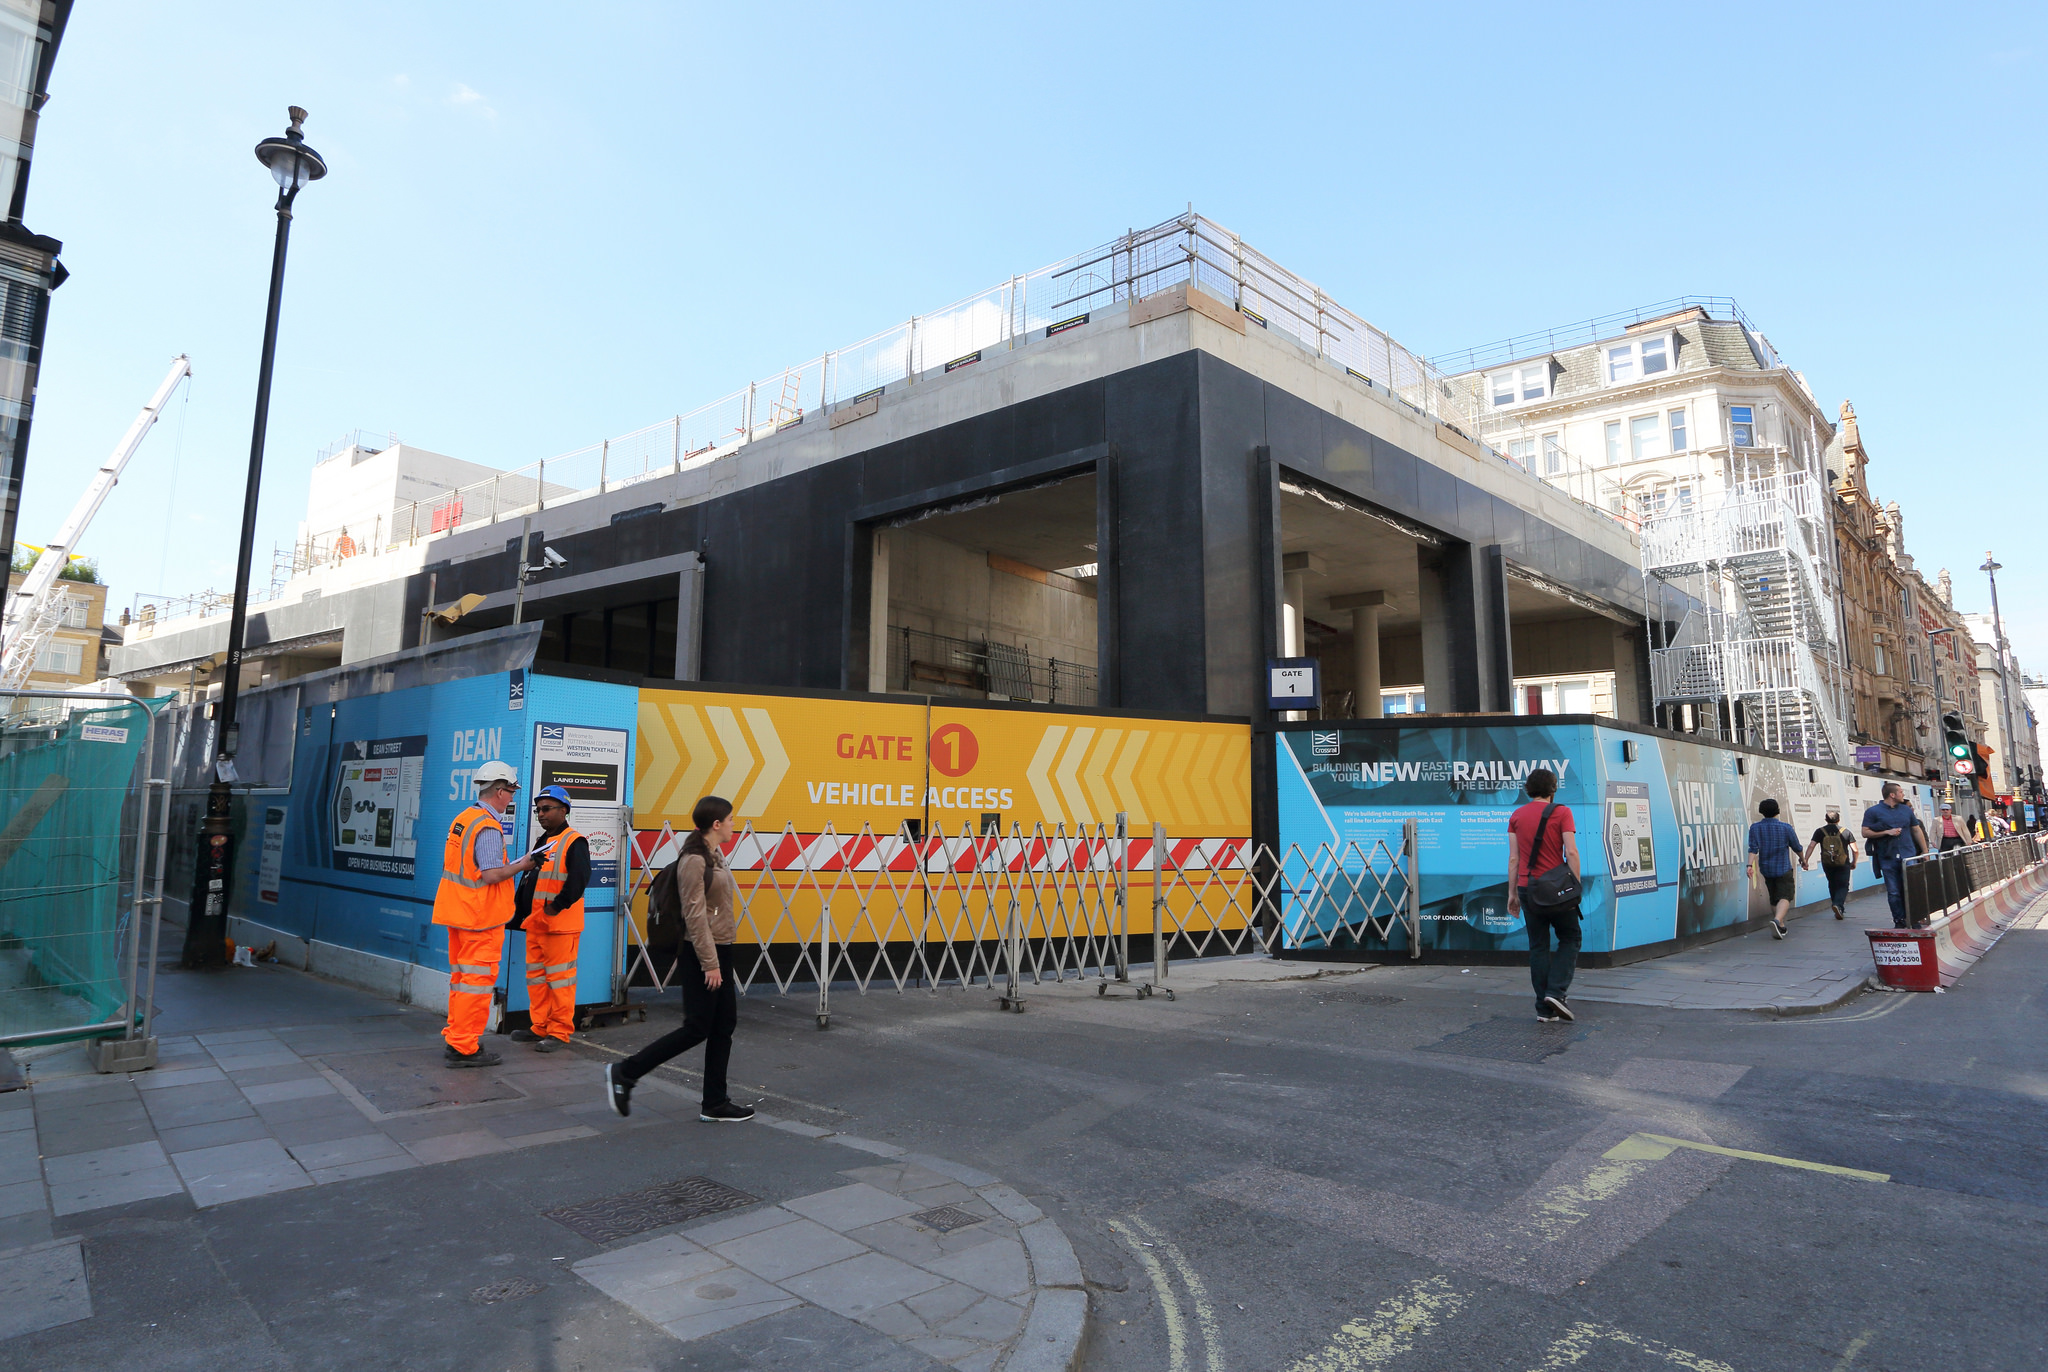 Photo of Dean Street worksite from Oxford Street showing site hoardings including vehicle access gate